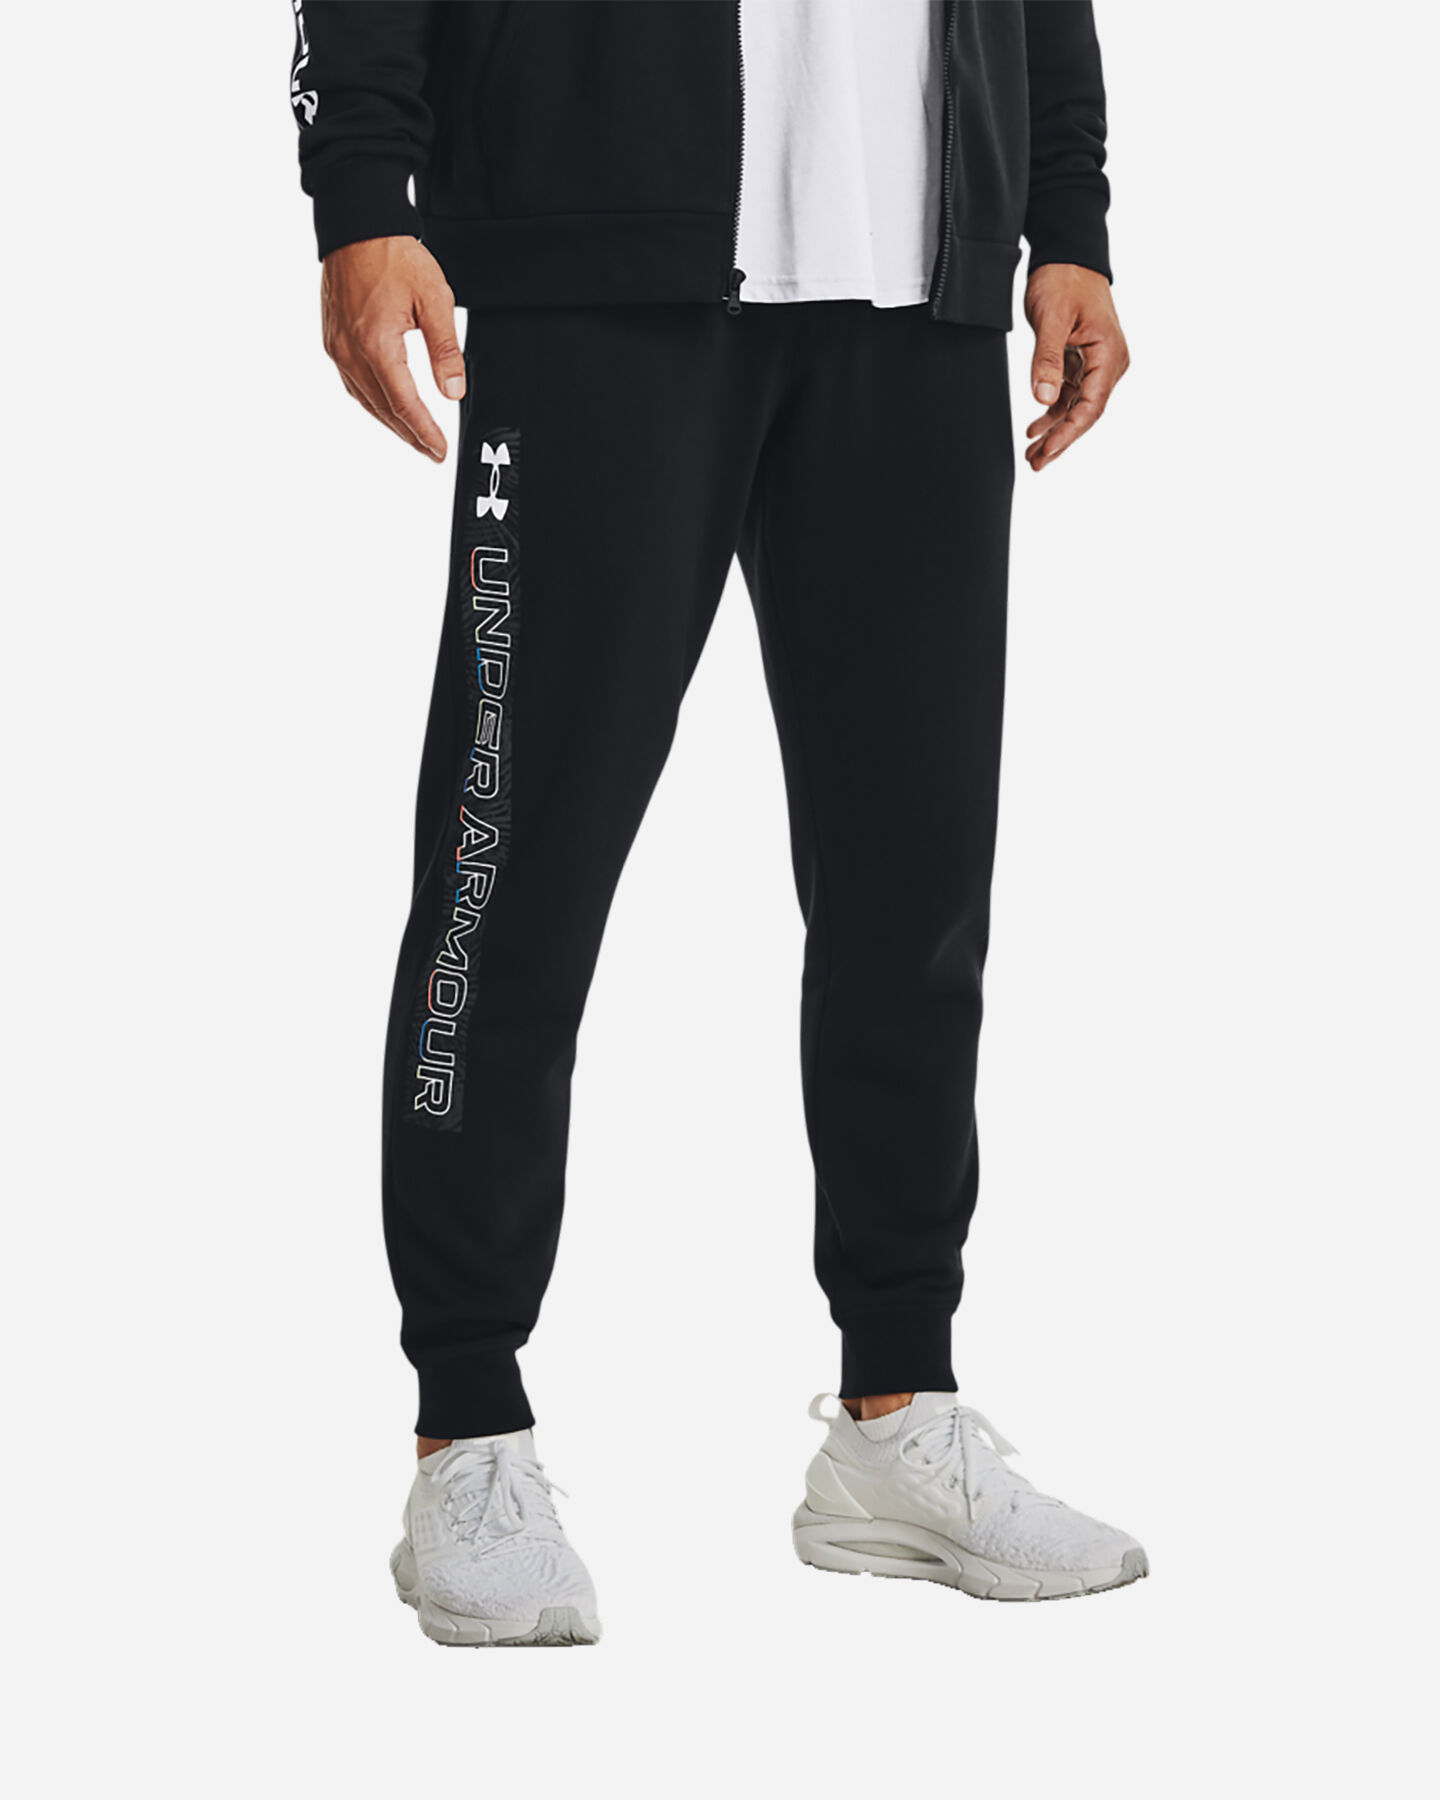  Pantalone UNDER ARMOUR A RIVAL LIGHT LOGO GRAPHIC M S5390471 scatto 2